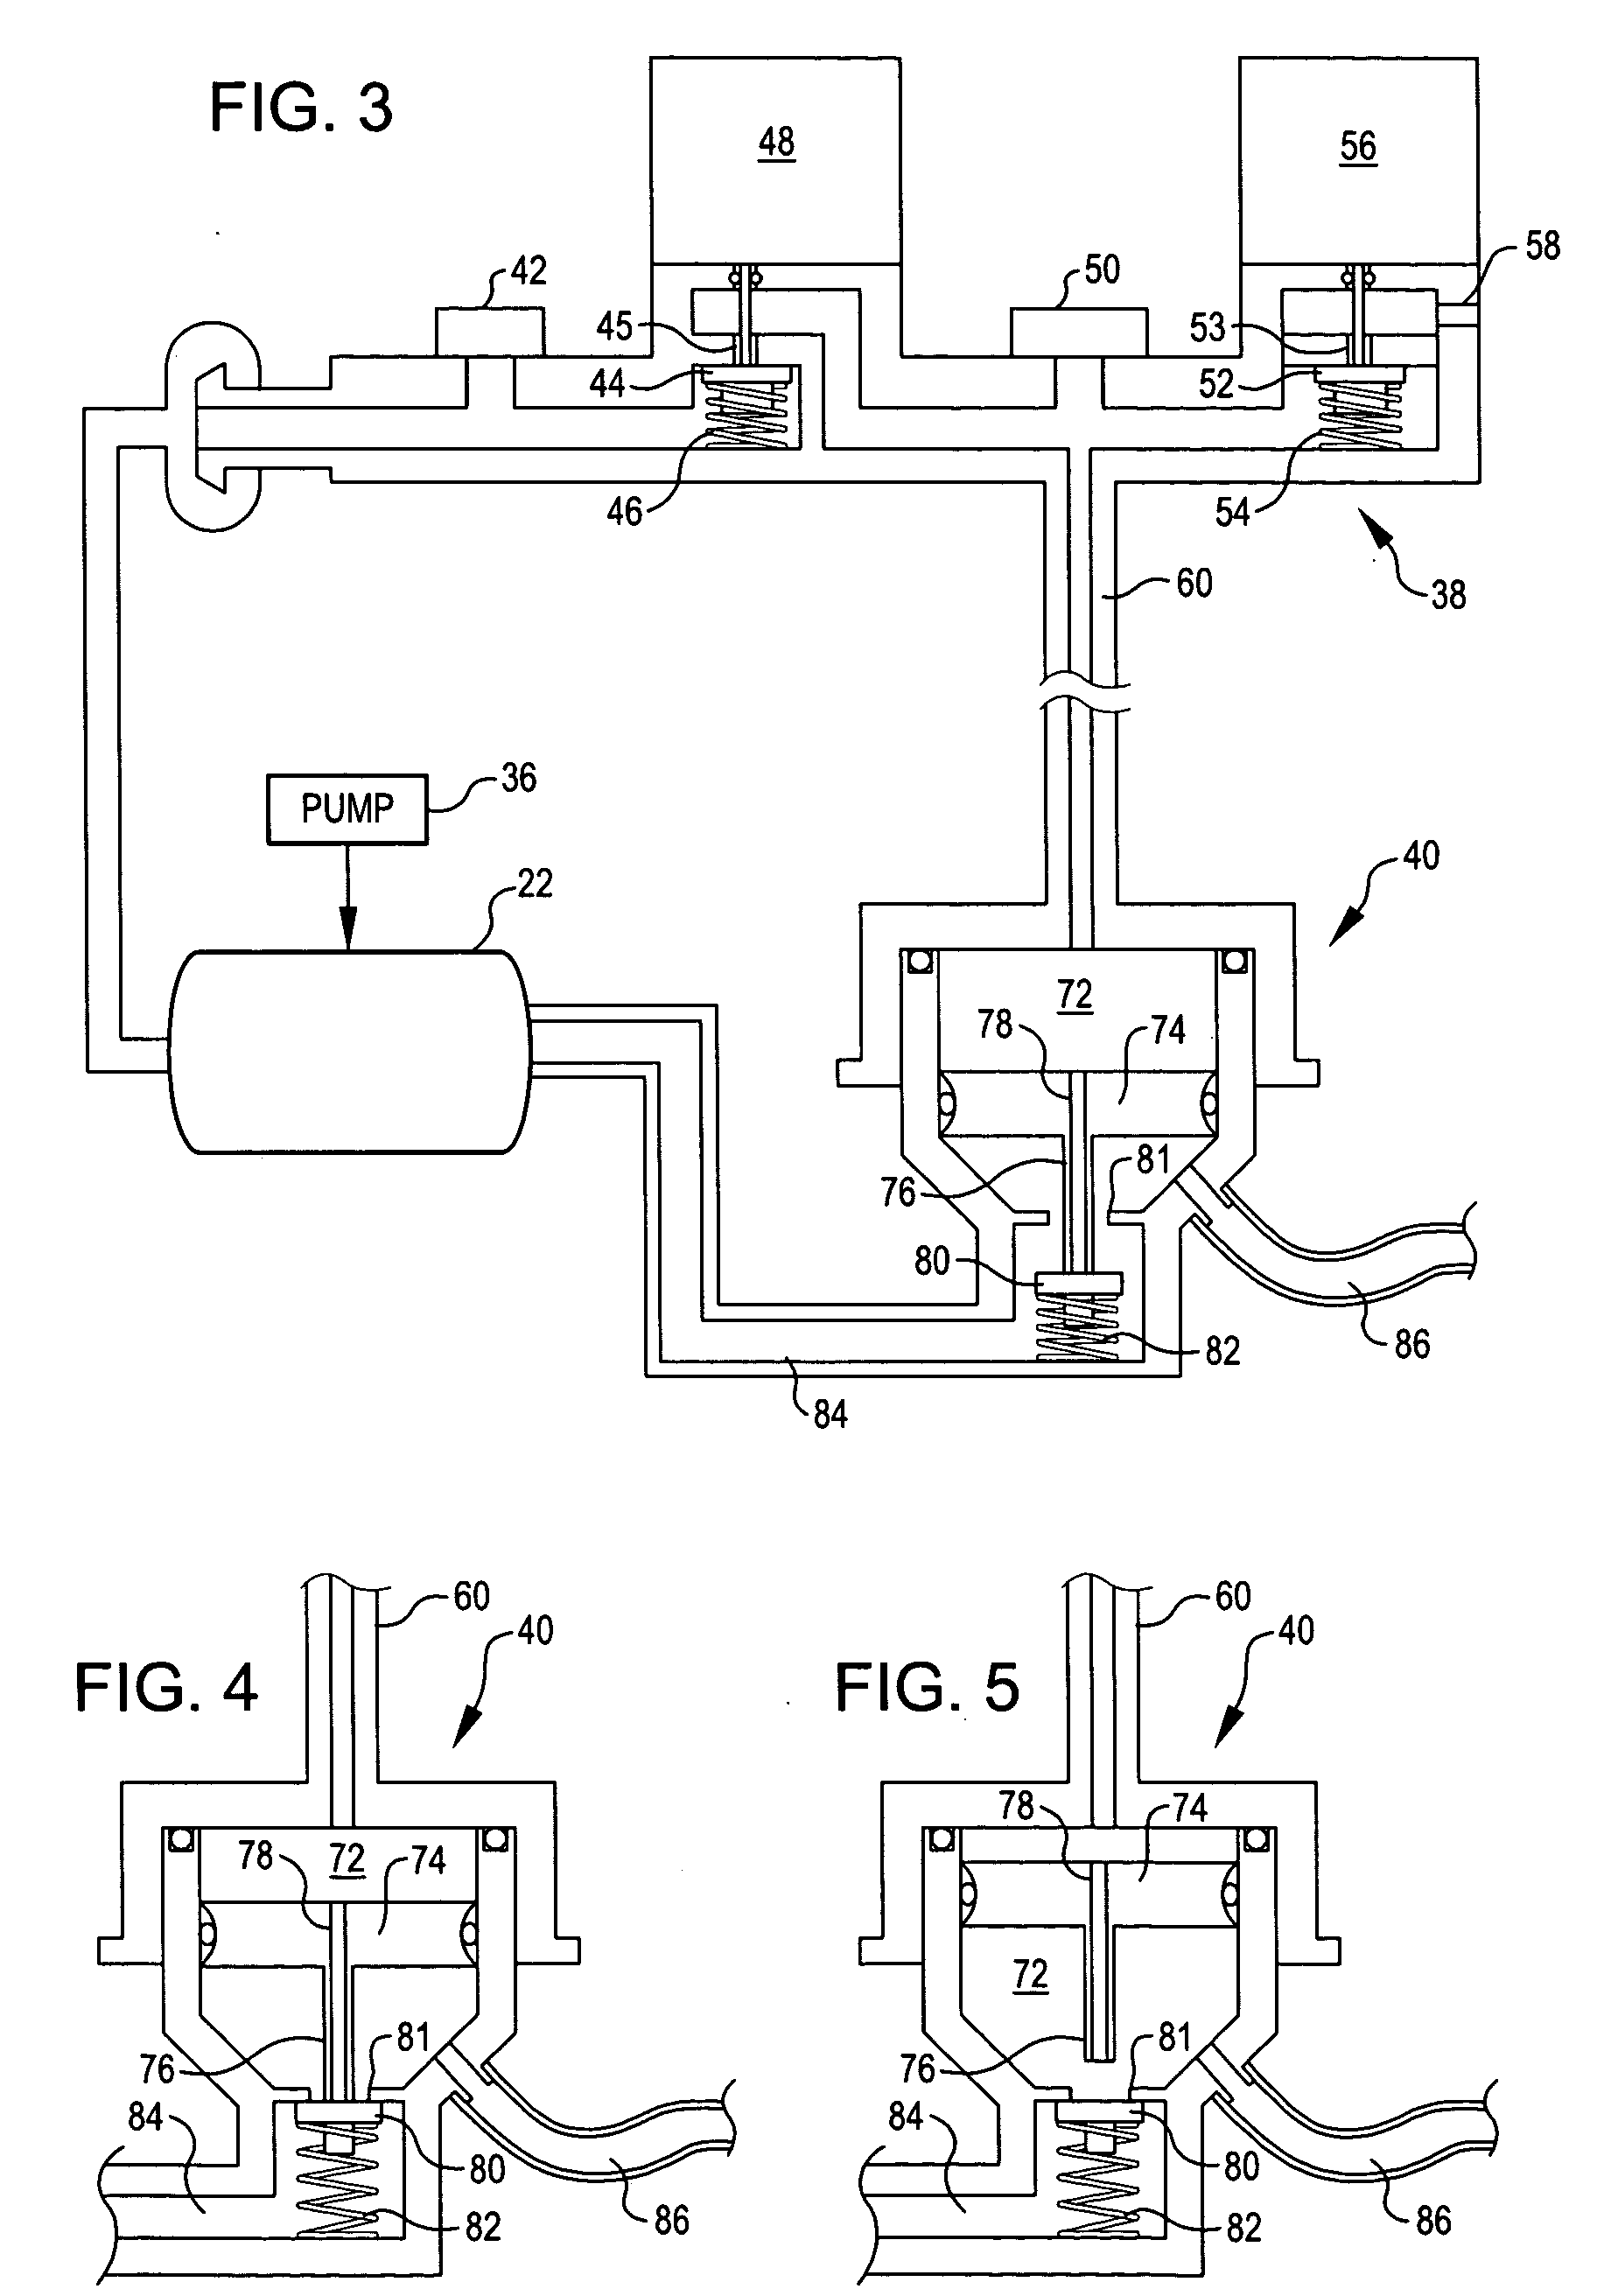 Air compressor with variable speed motor